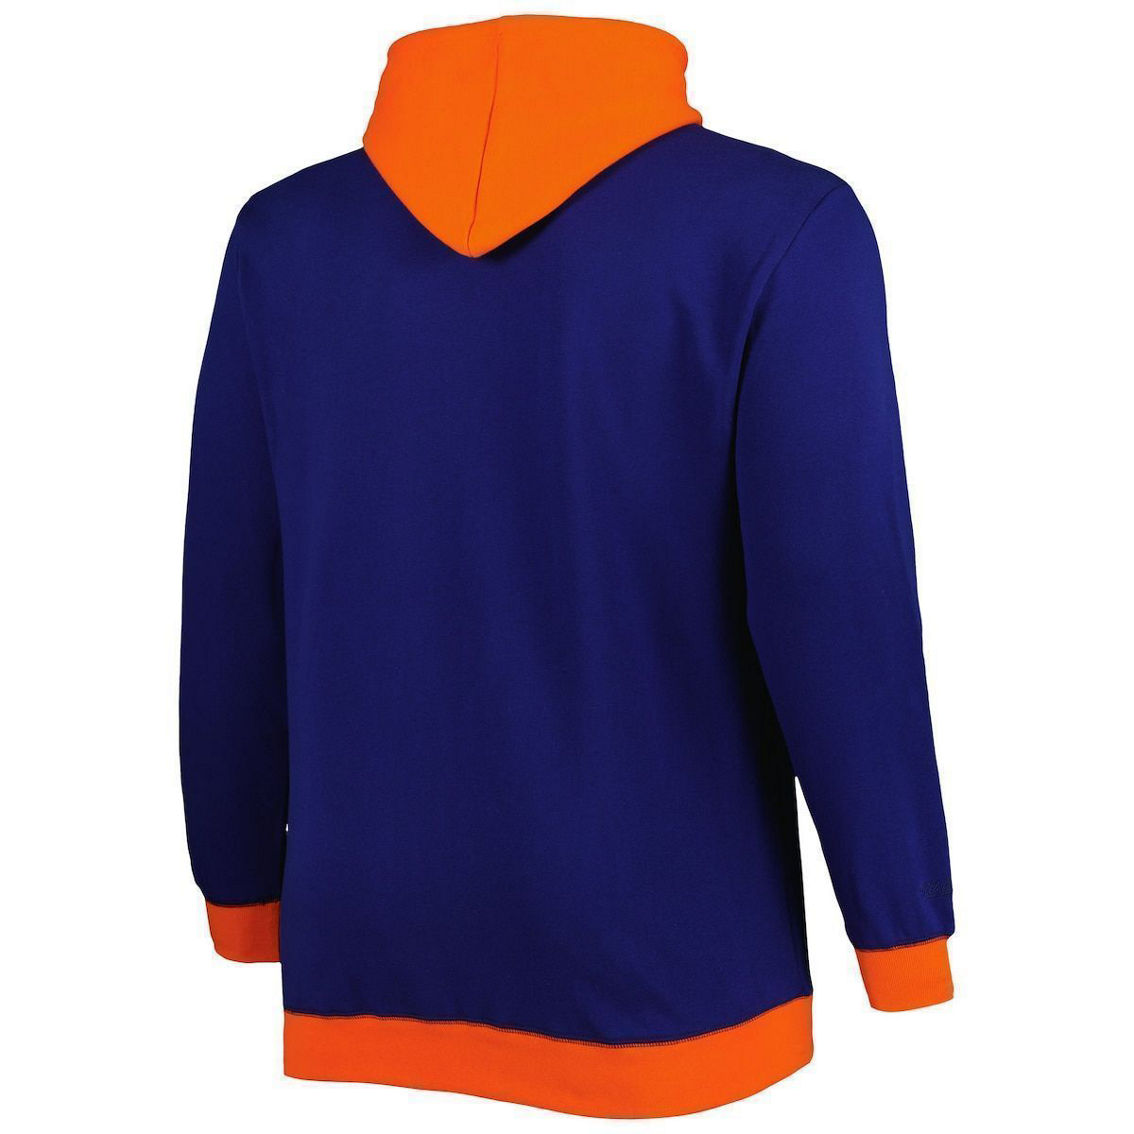 Mitchell & Ness Men's Navy/Orange Chicago Bears Big & Tall Big Face Pullover Hoodie - Image 4 of 4